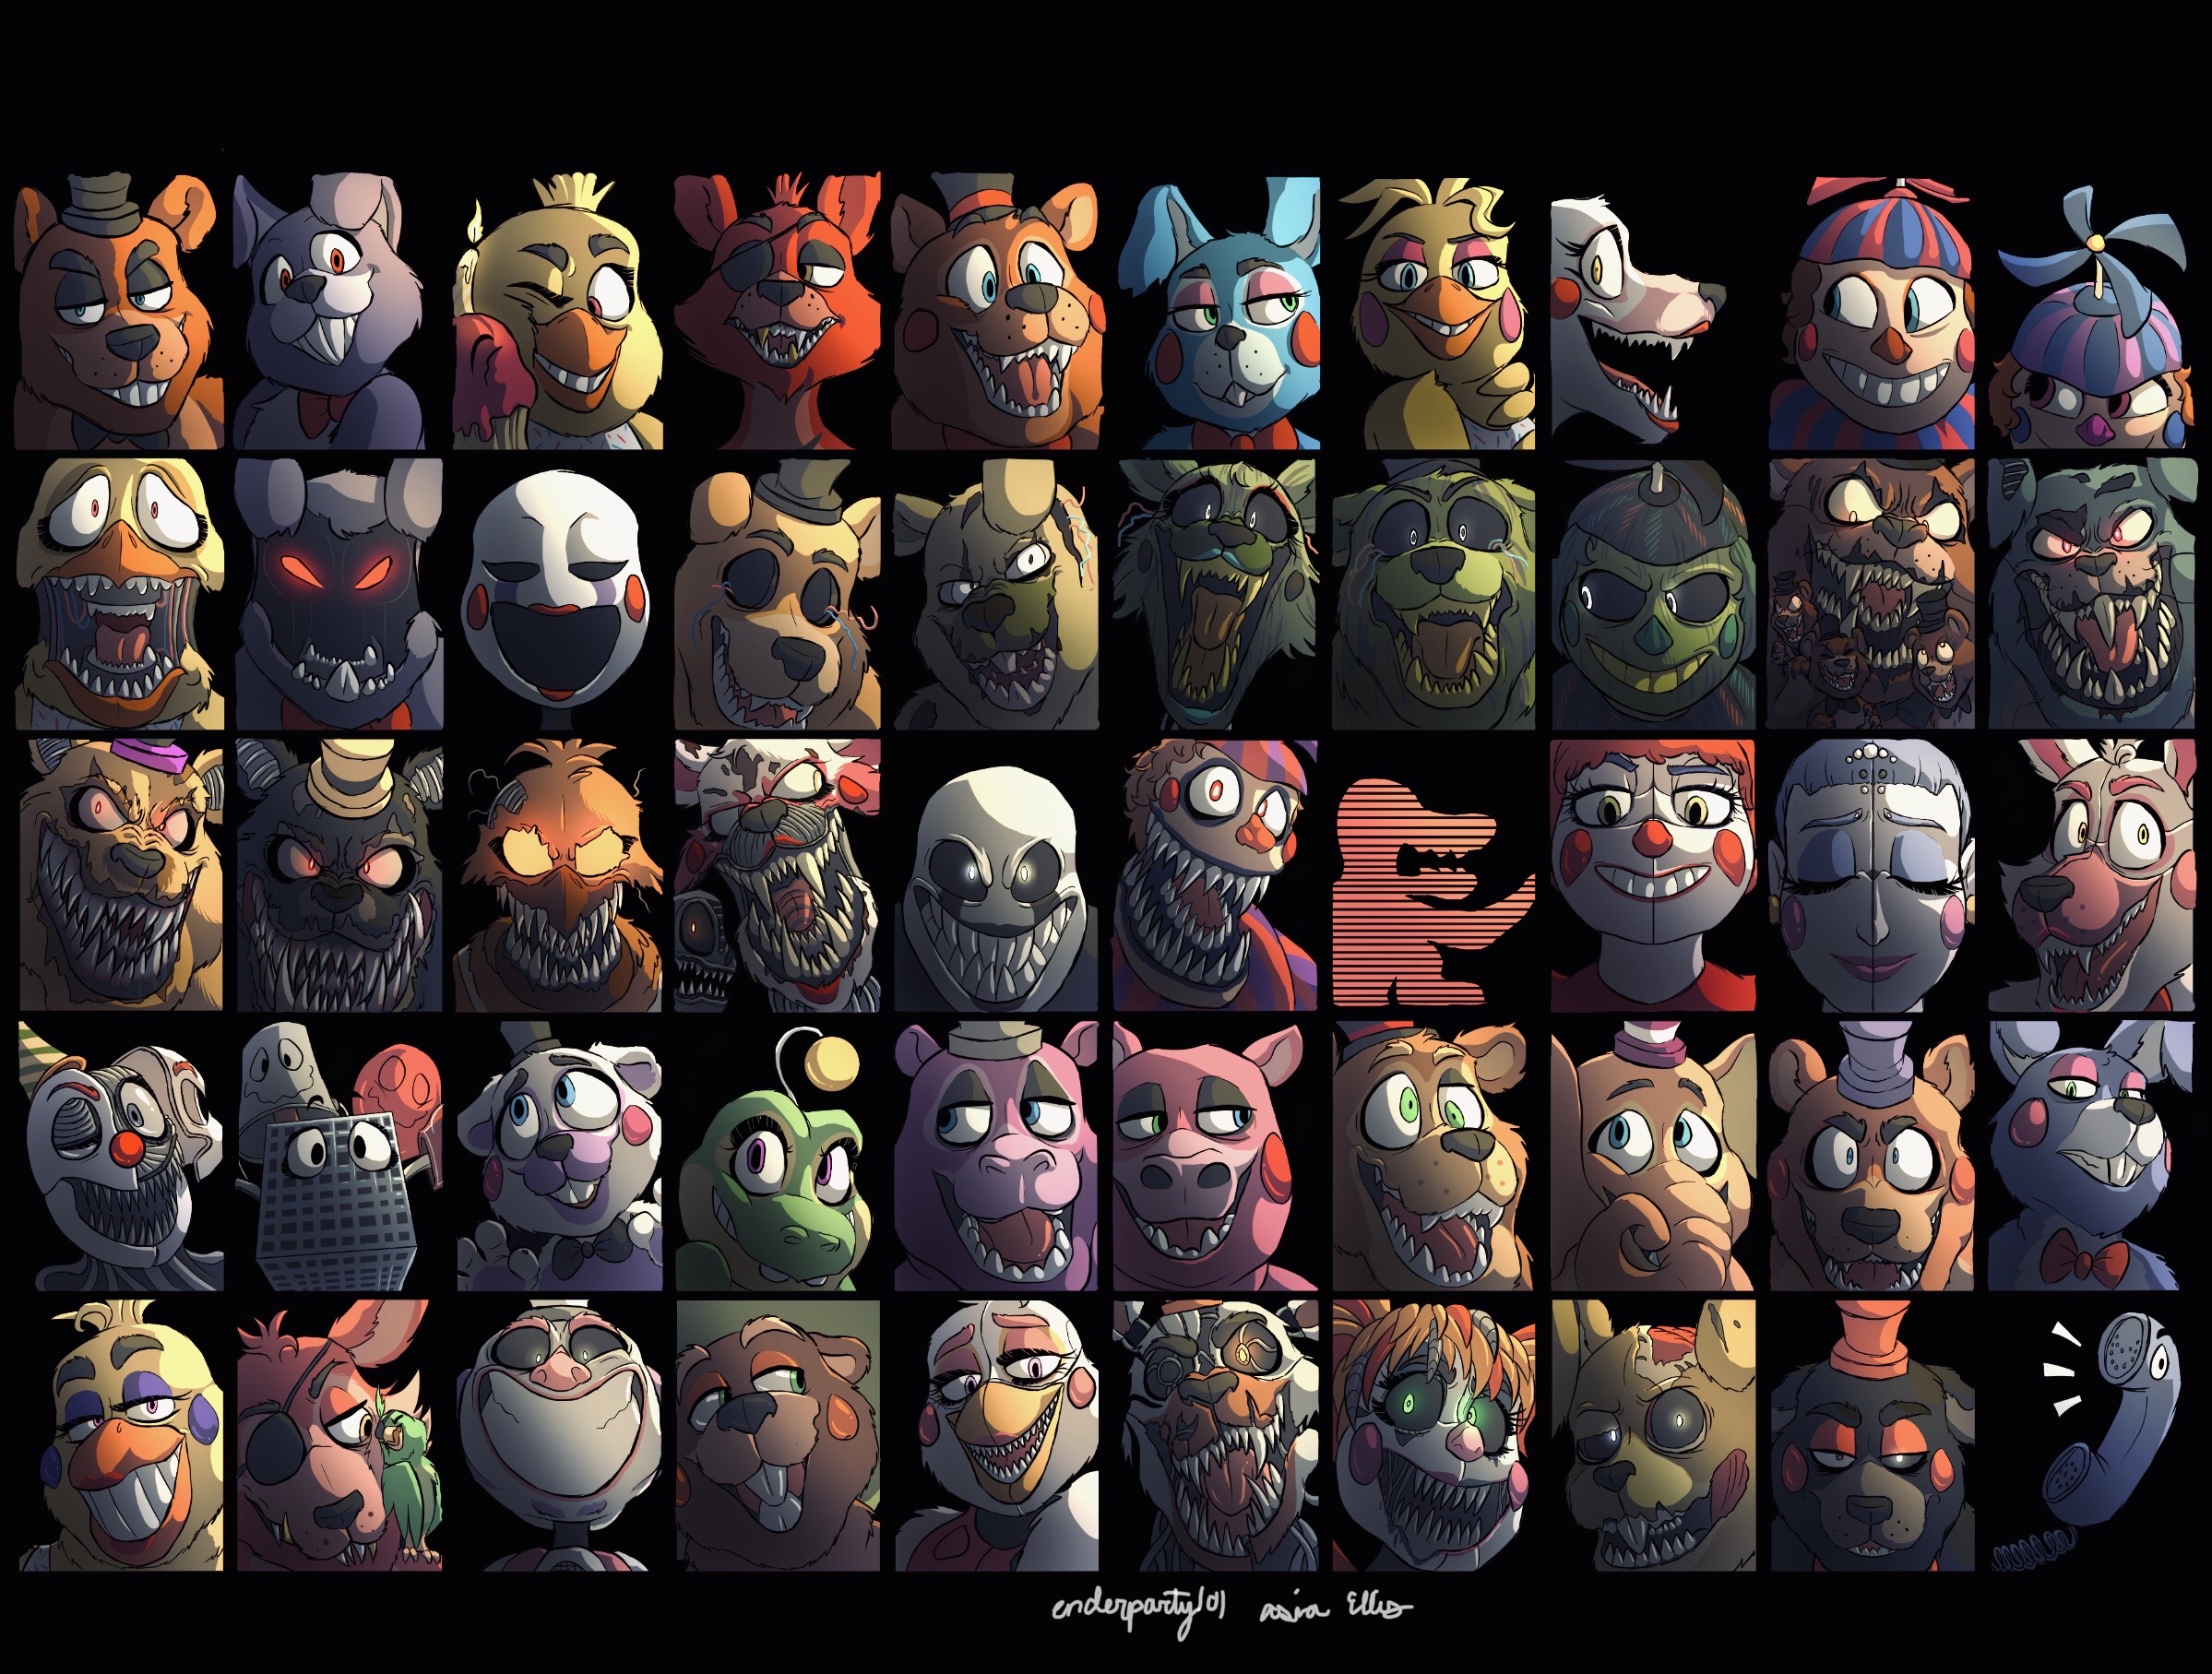 fnaf-ucn-roster-my-style-by-enderparty-on-deviantart